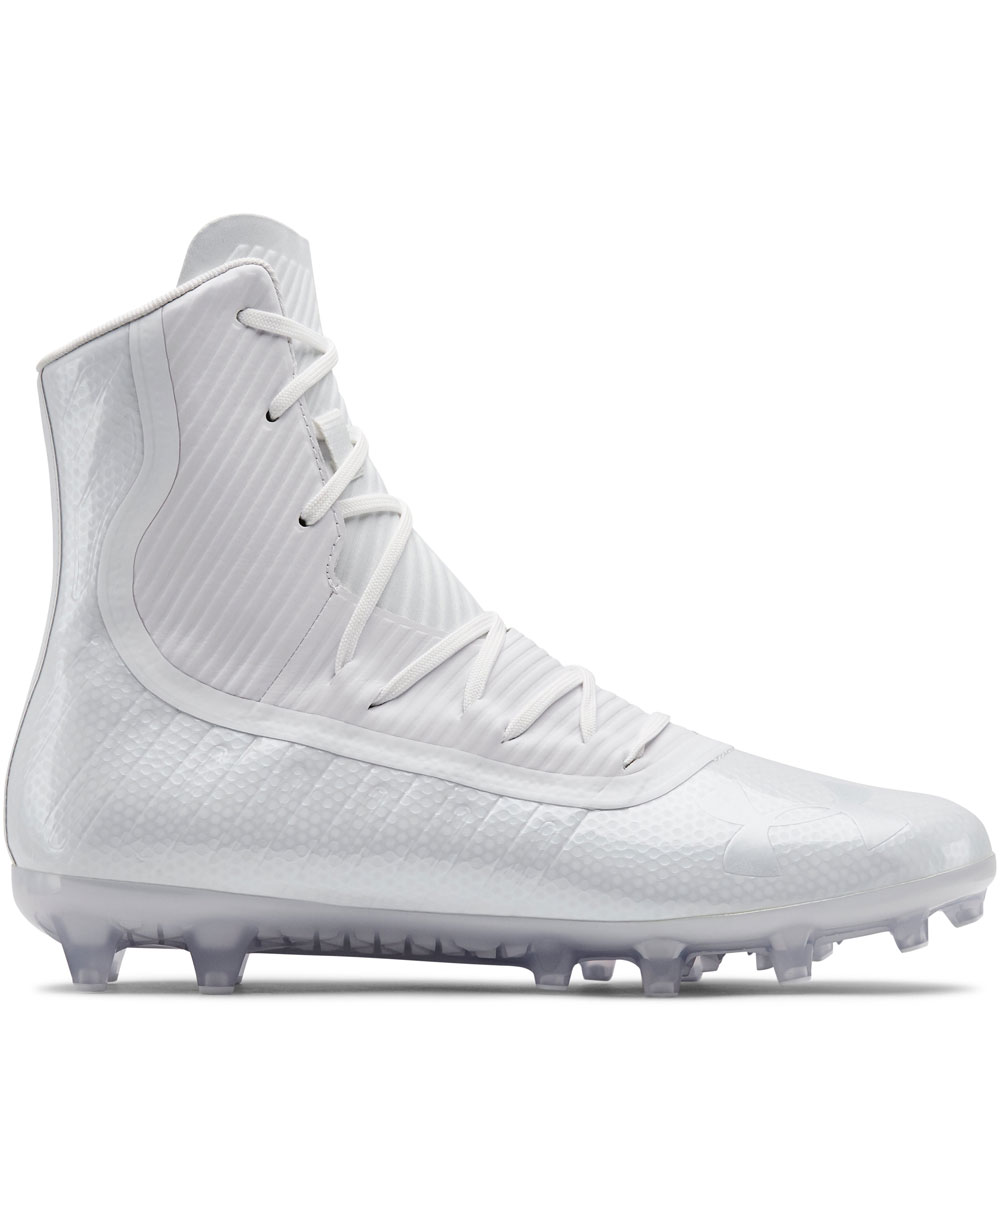 white highlight cleats